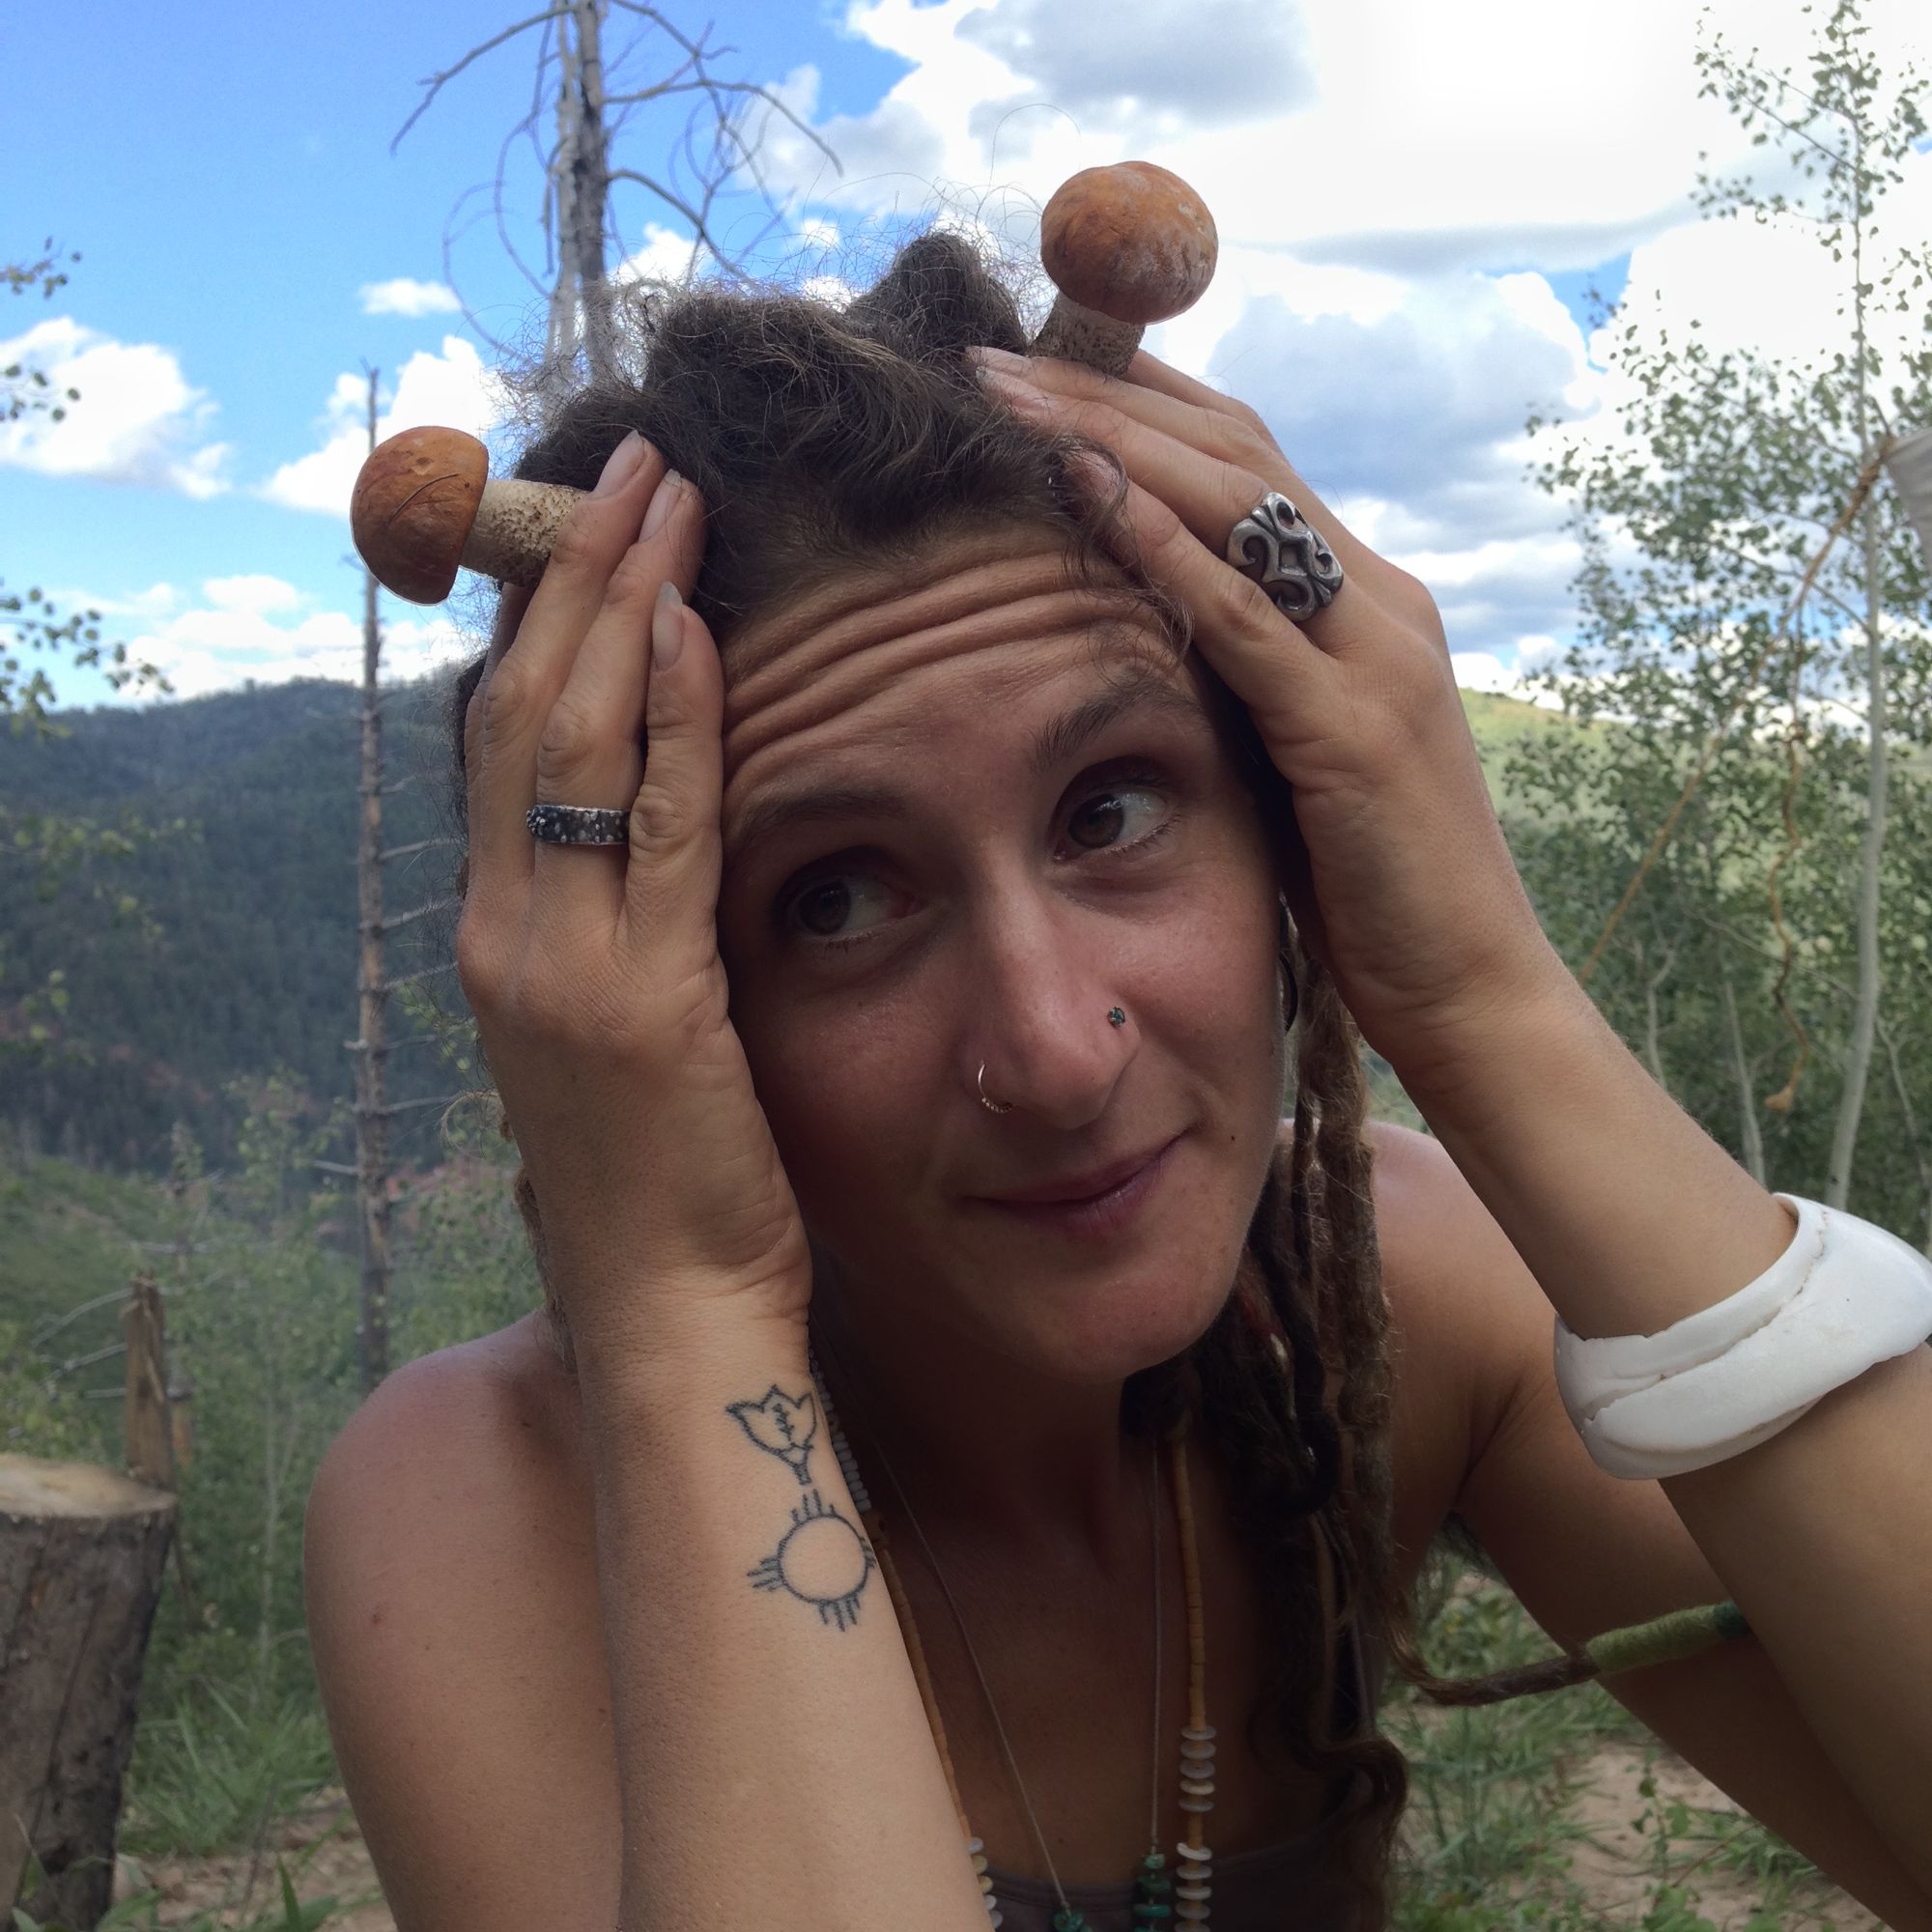 A woman holds two small mushrooms up to her head like antlers.  